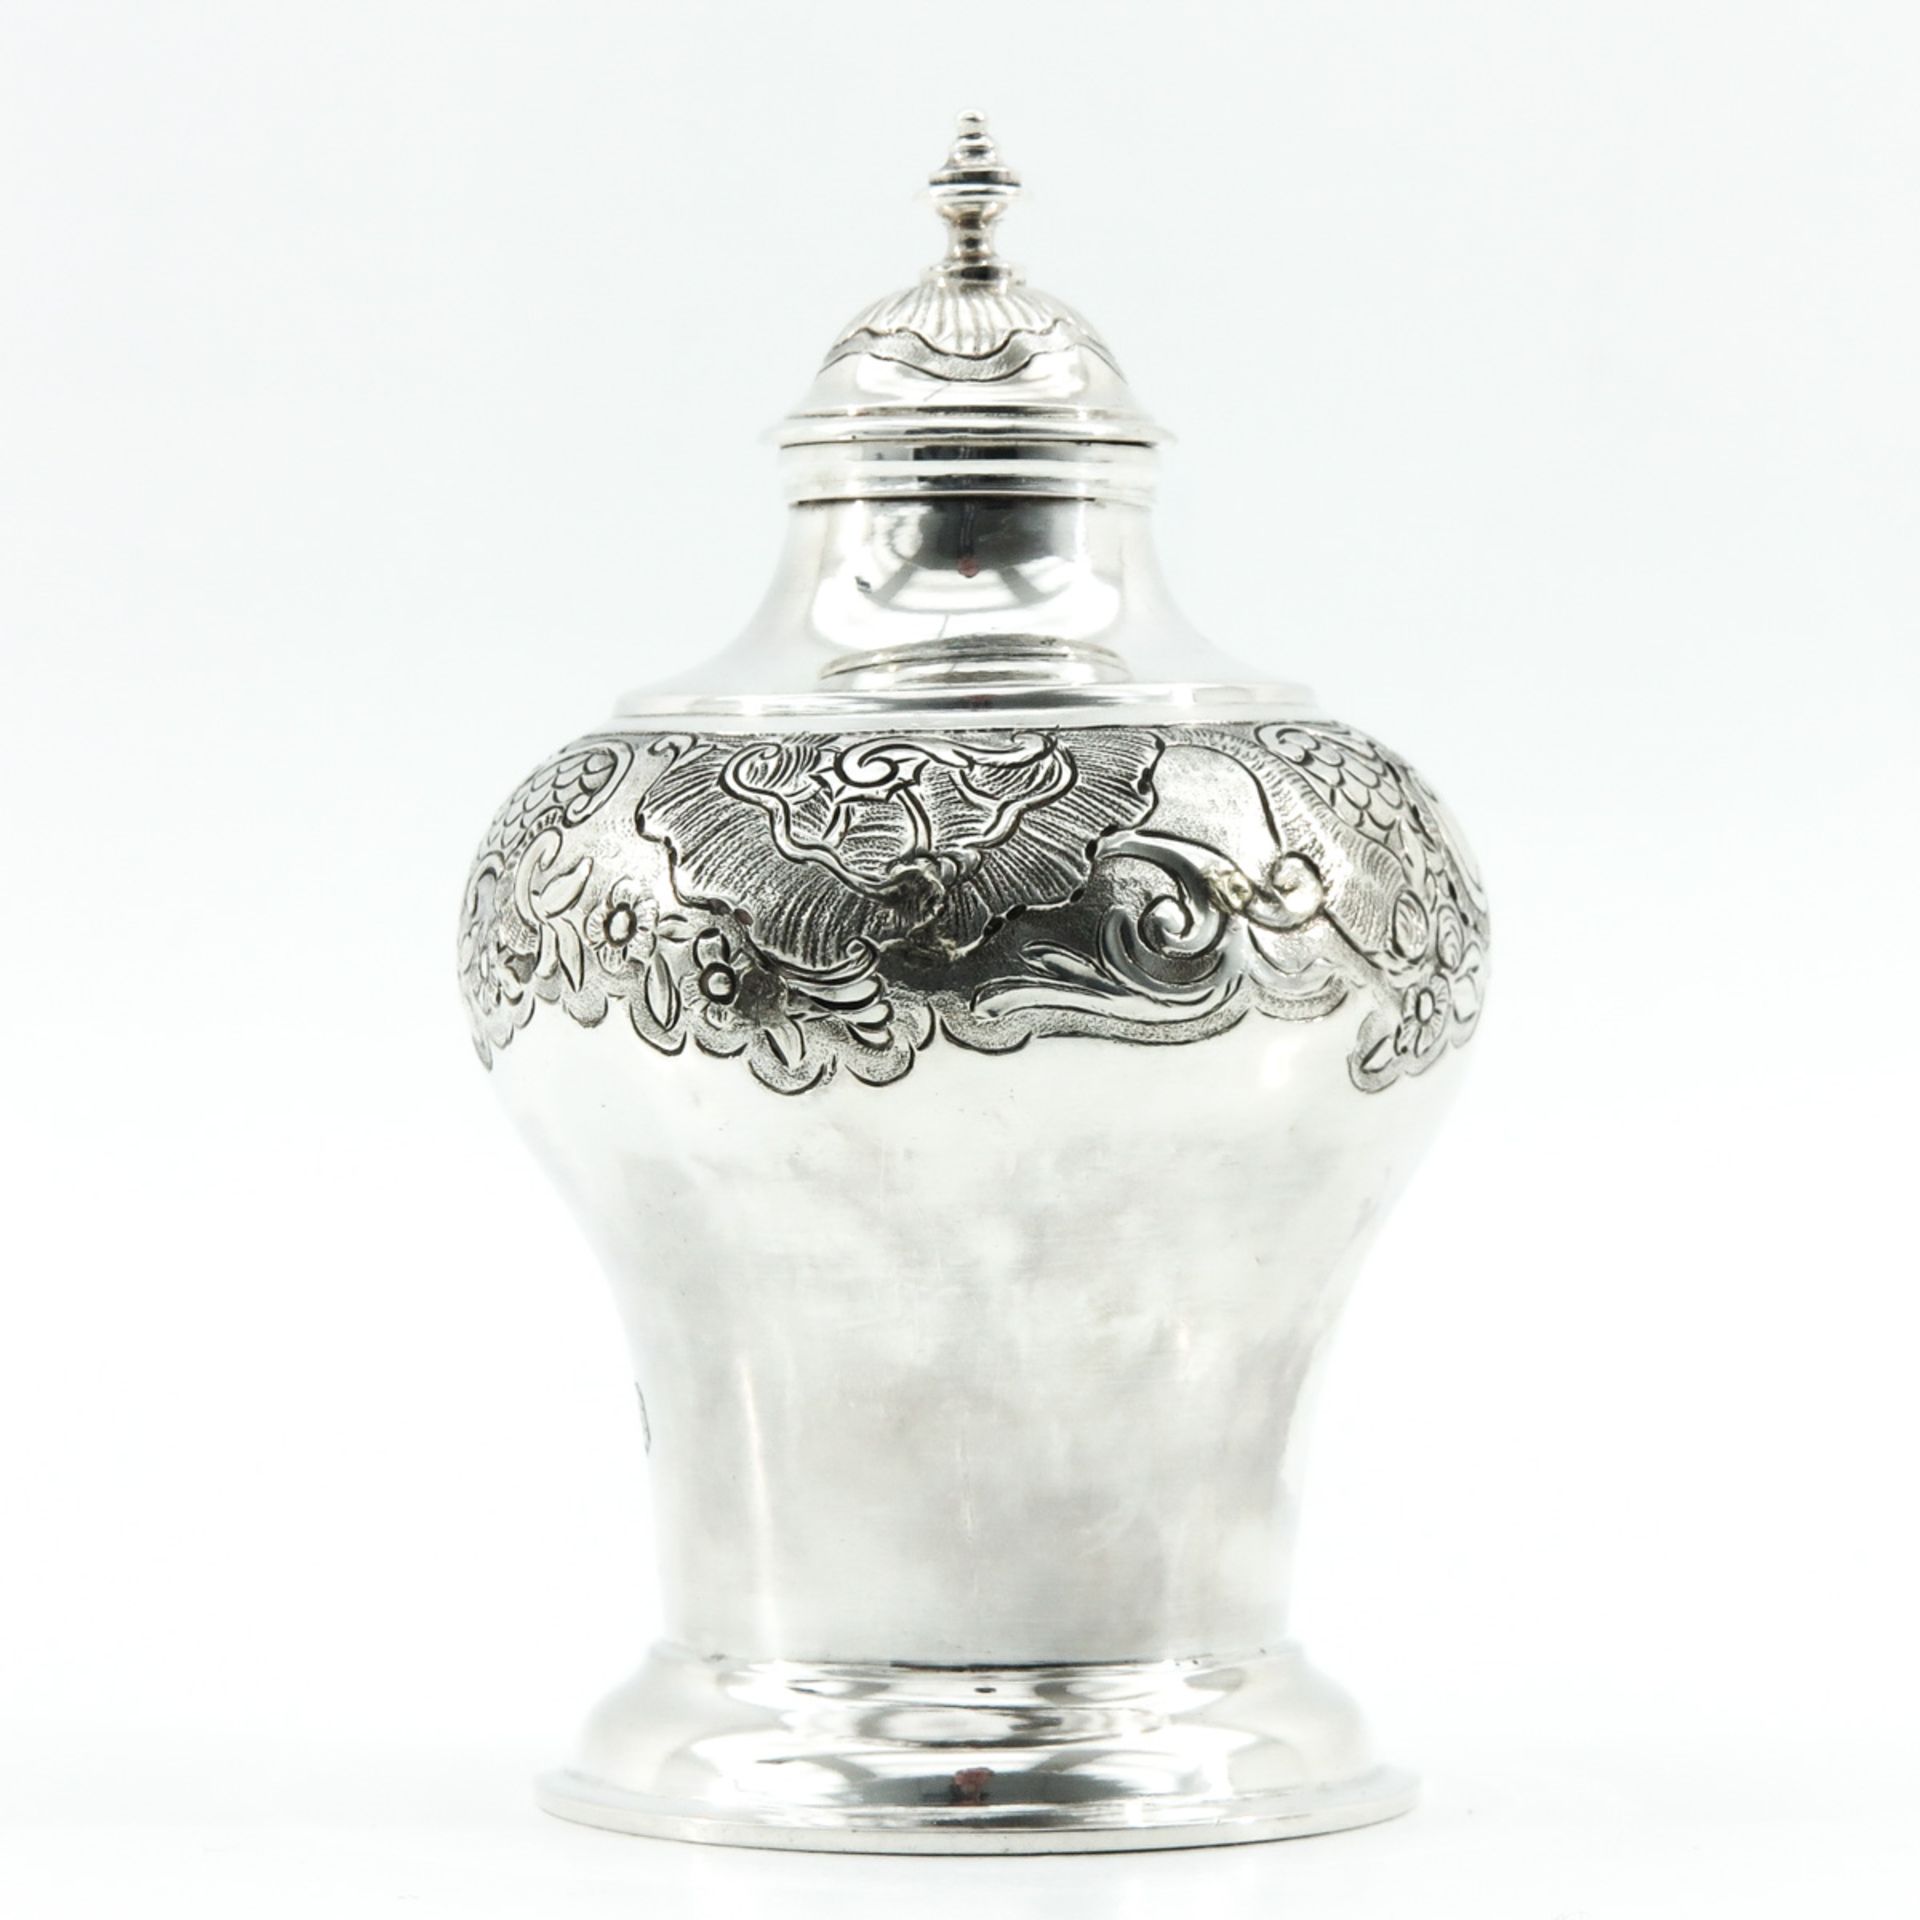 A Silver Tea Caddy - Image 2 of 10